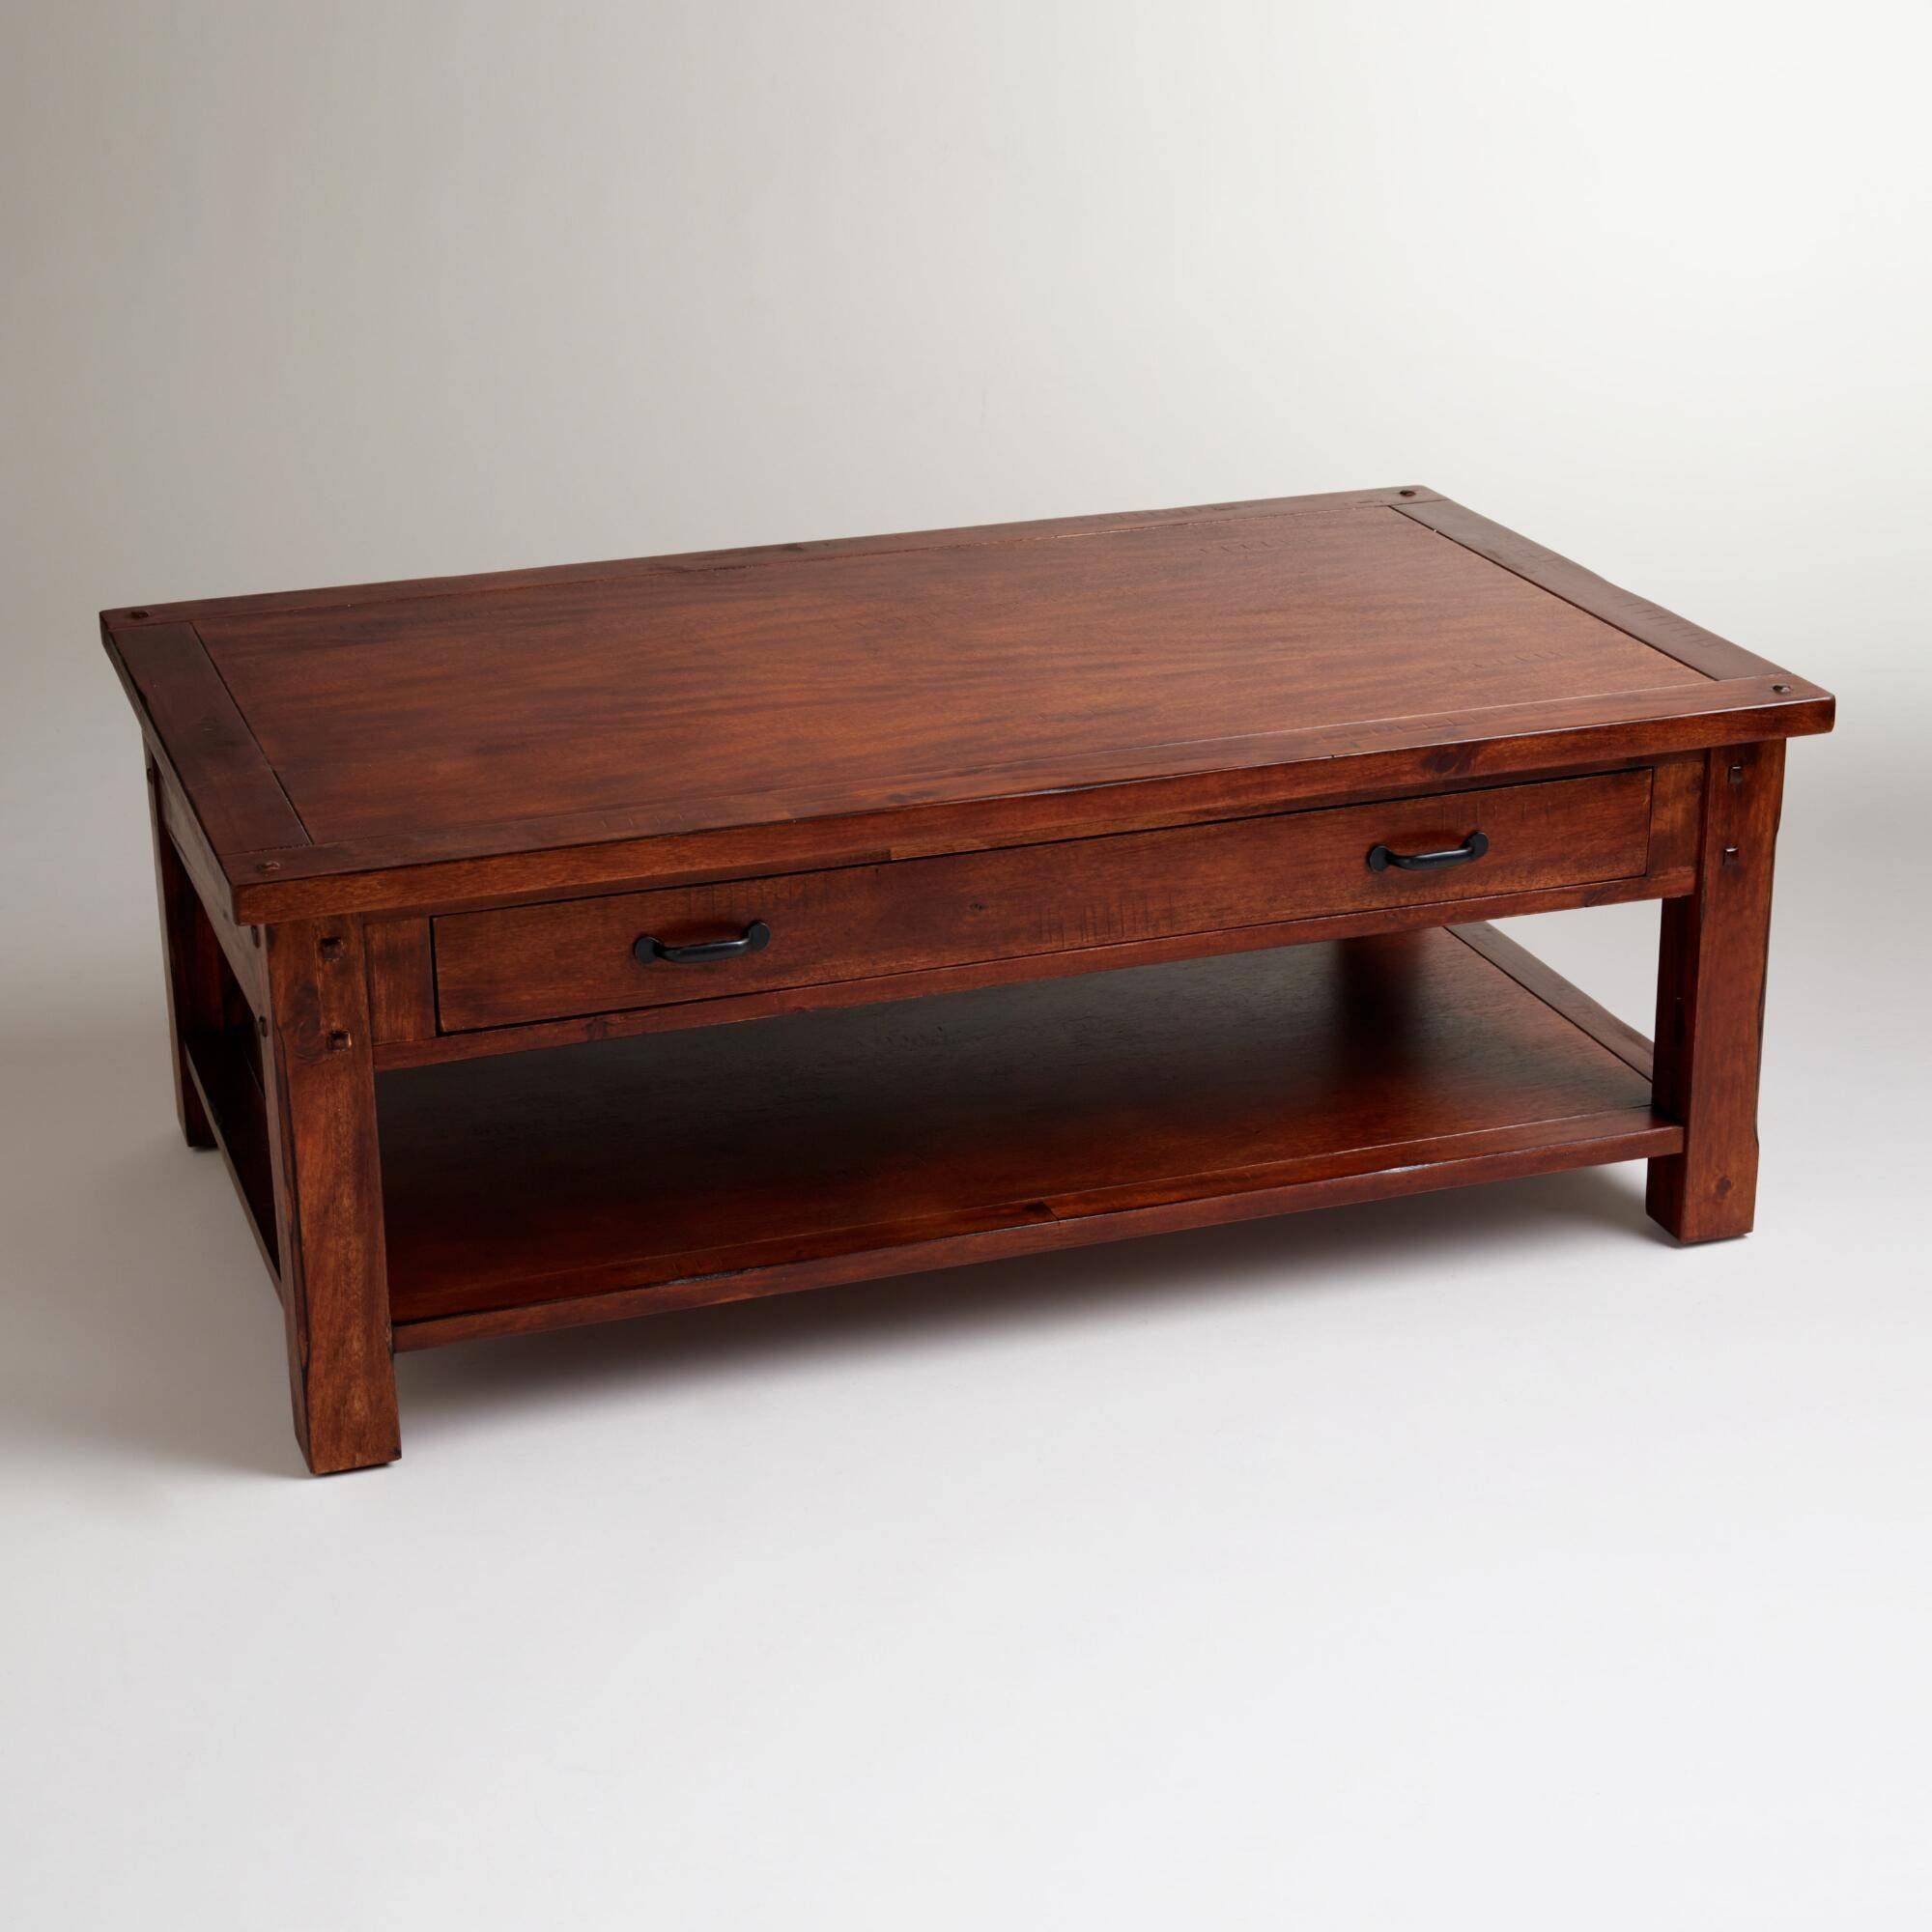 Furniture: Admirable Raymour And Flanigan Coffee Tables For Best Regarding Low Coffee Tables With Drawers (View 22 of 30)